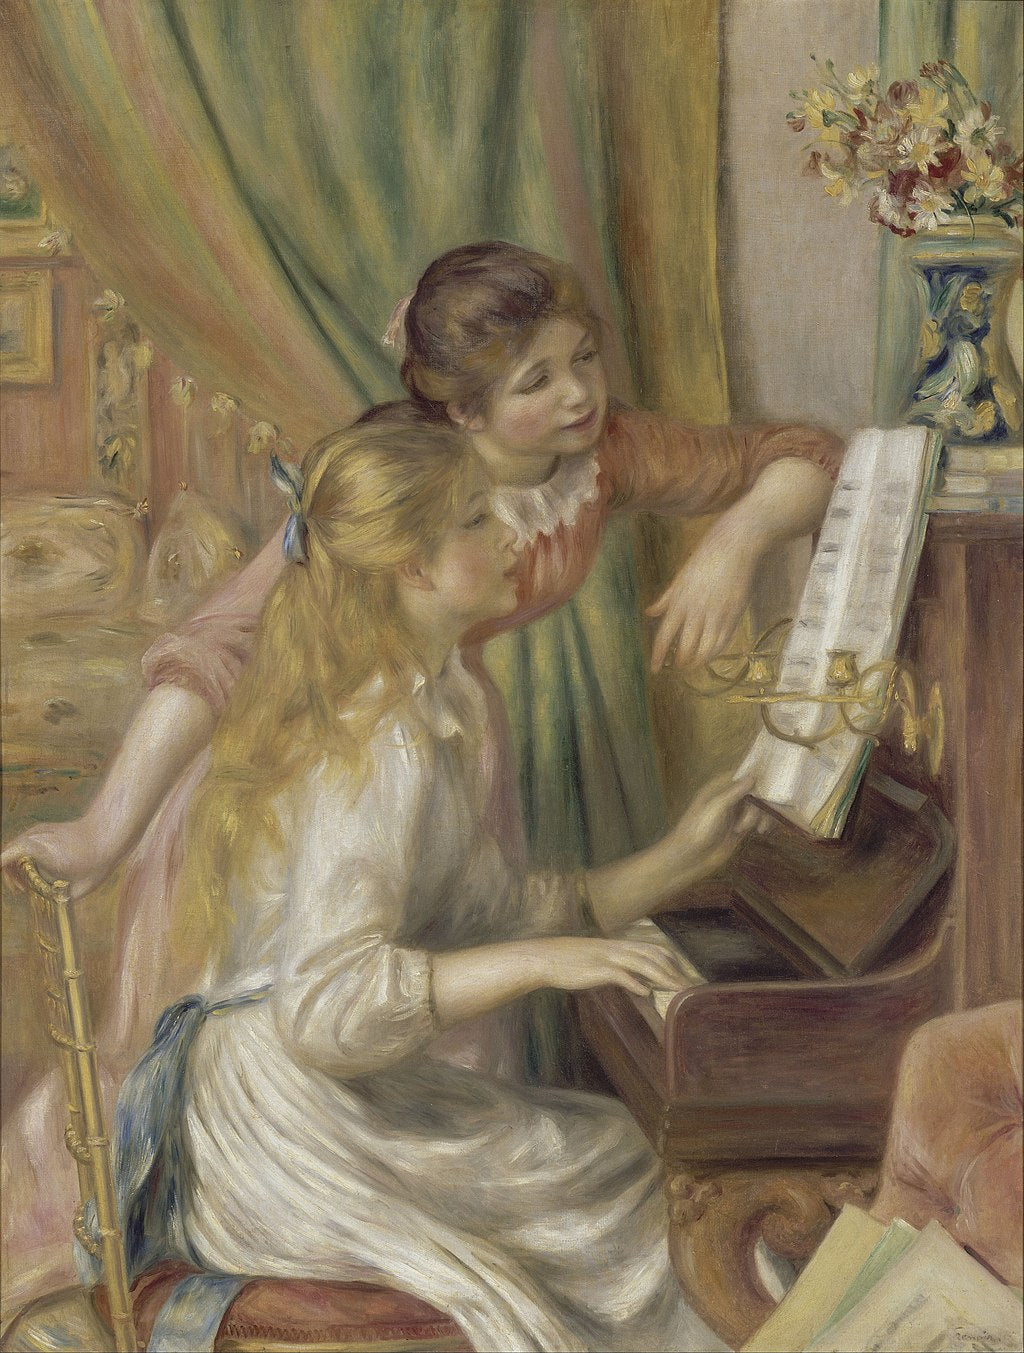 Girls at the Piano by Pierre-Auguste Renoir Reproduction for Sale by Blue Surf Art